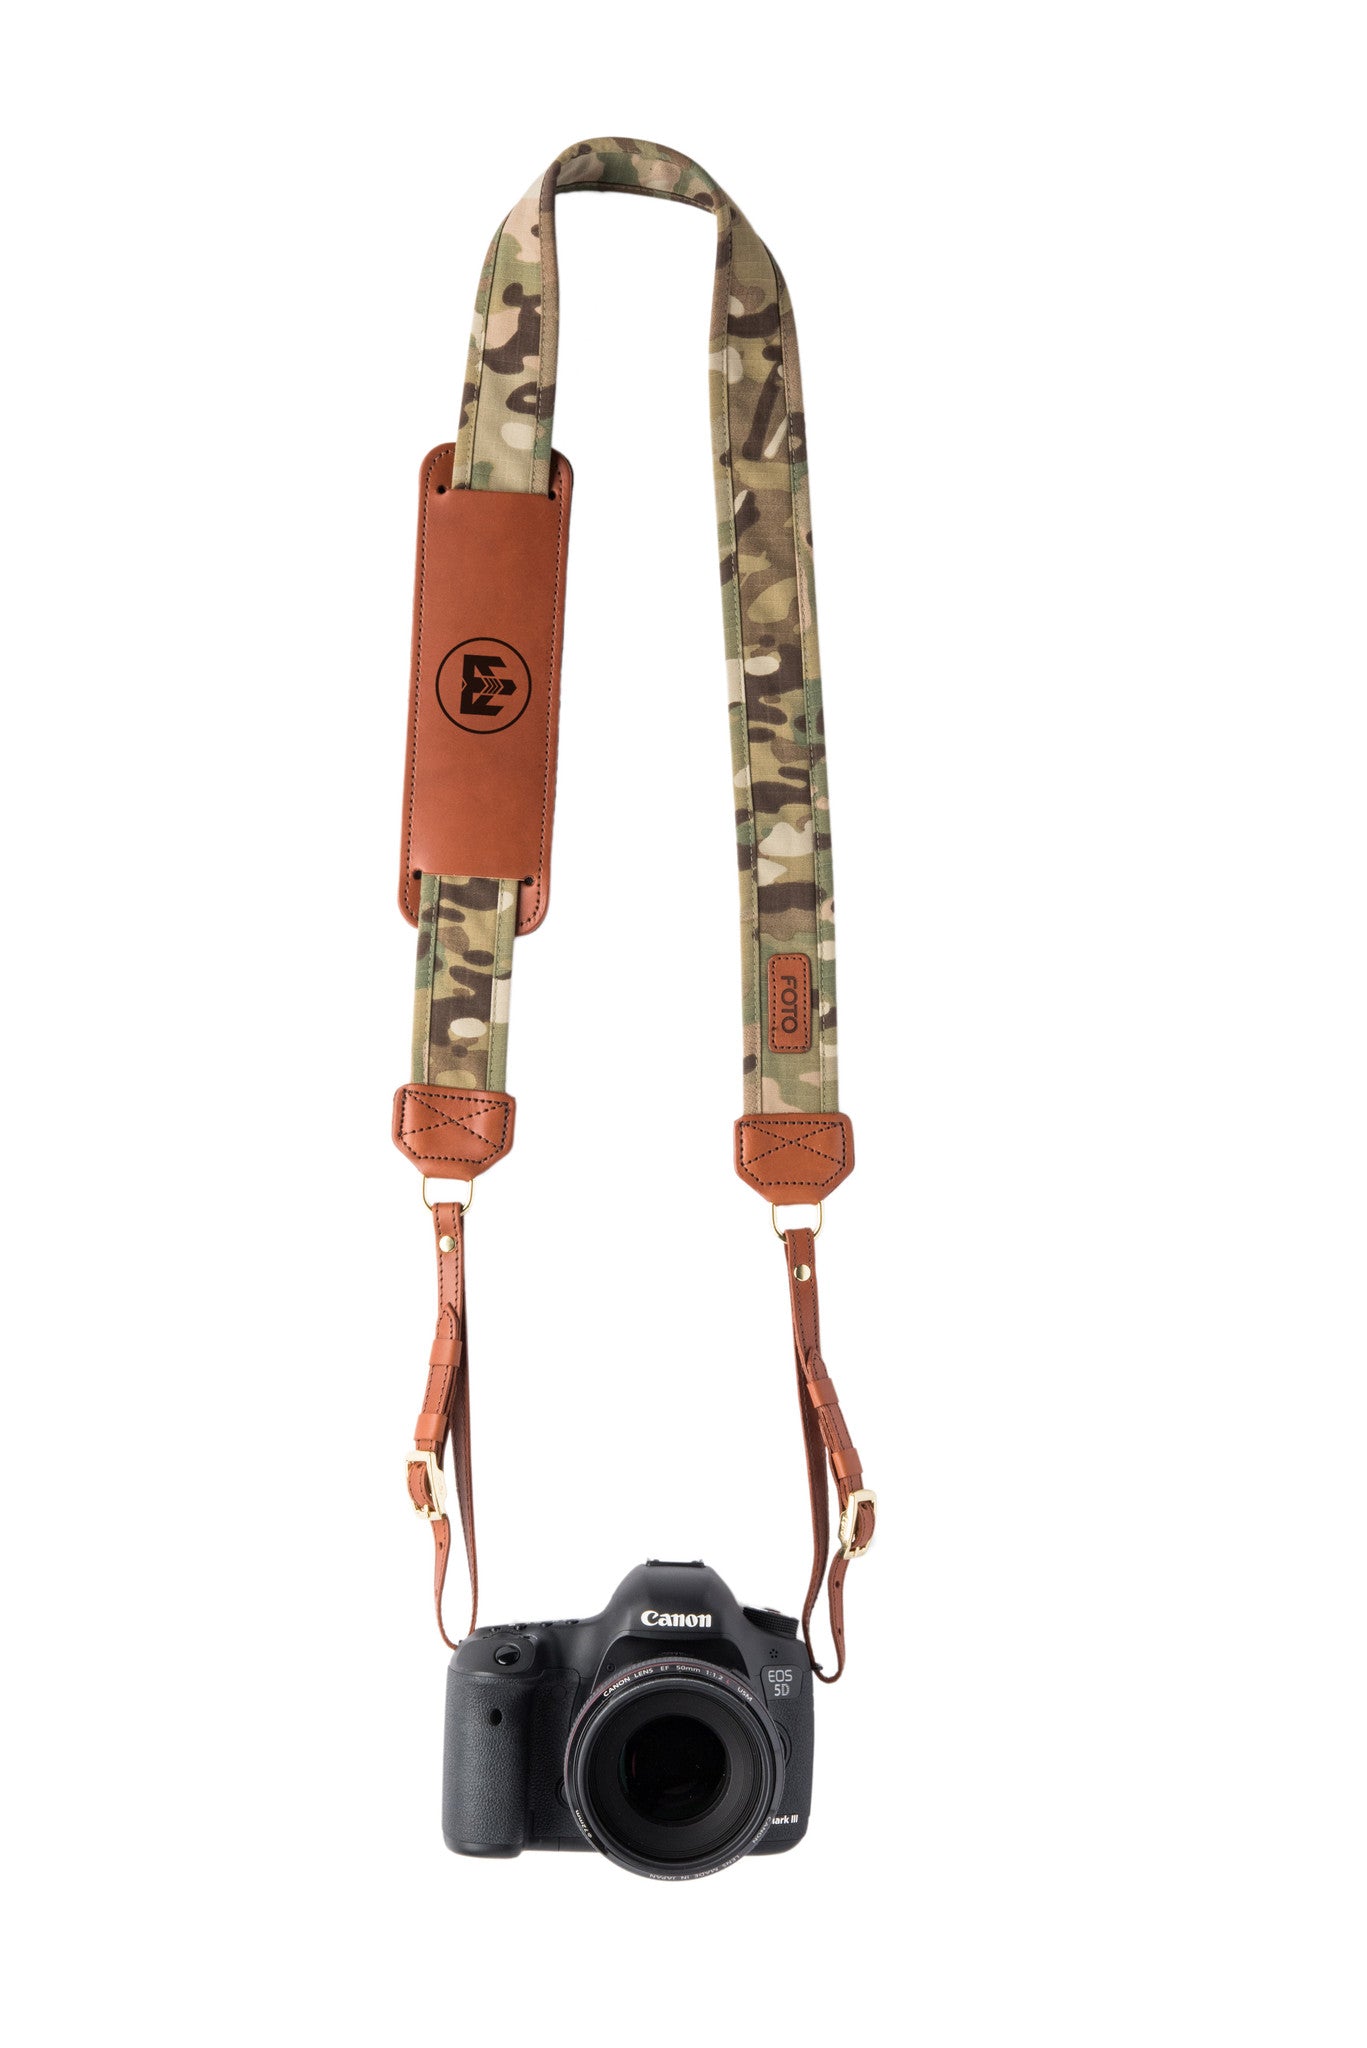 FOTO | Travis Fotostrap - a camo canvas and genuine leather camera strap that can be personalized with a monogram or business logo, making it the perfect personalized gift! 